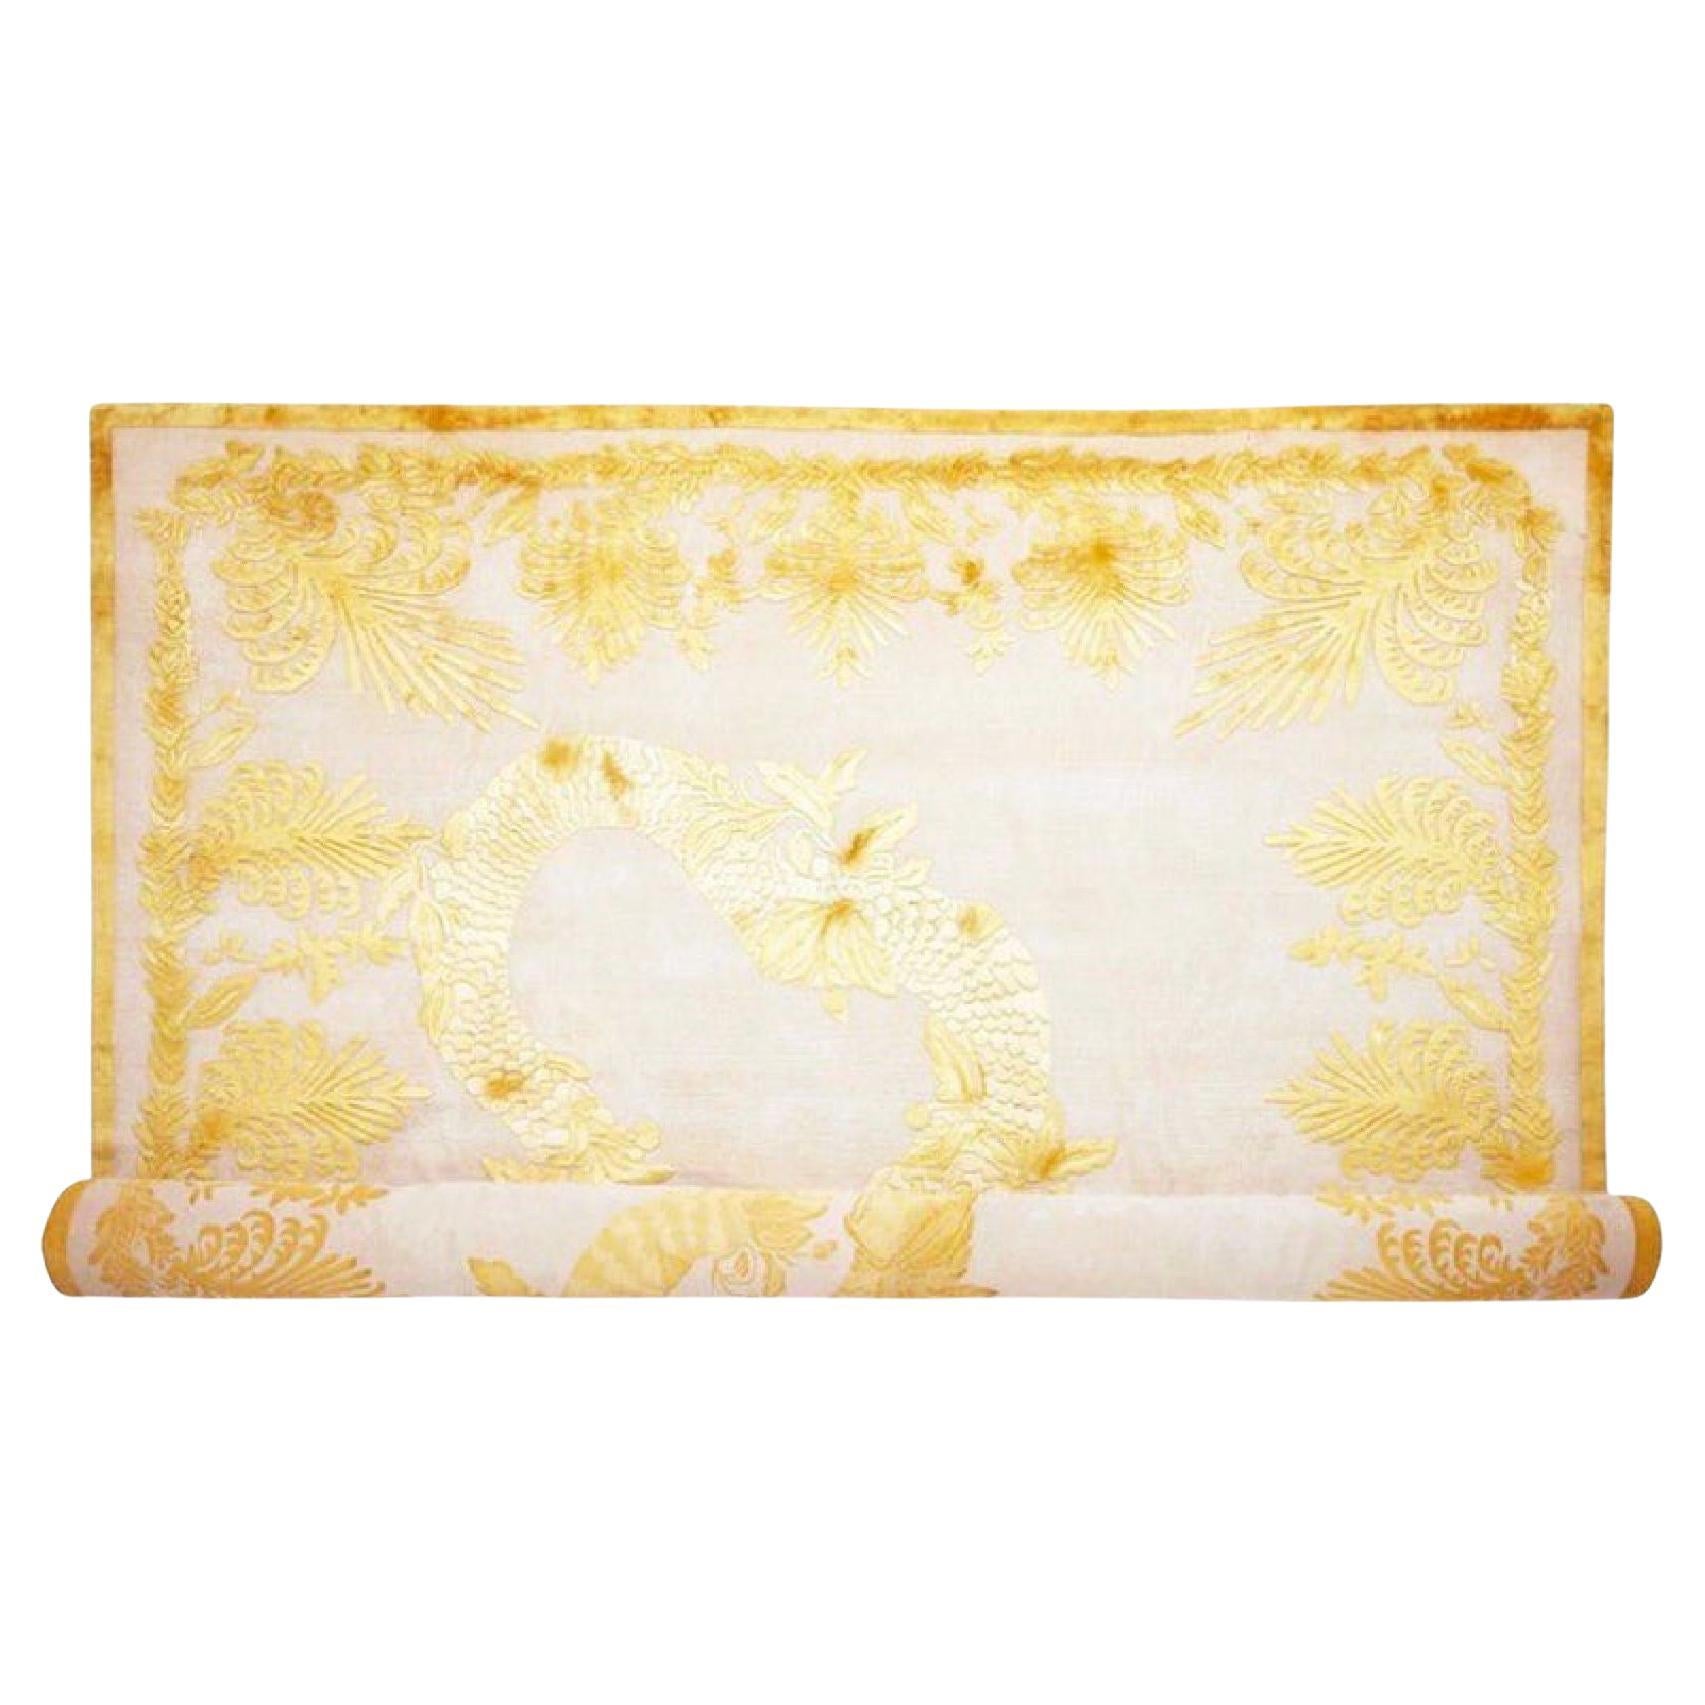 Alexander McQueen Military Brocade Palatial Rug, Gold, Ivory, Silk, Wool, 2012. Extremely rare 18’7” x 12’ size. Limited edition gold on ivory color way (2012). This dramatic design was originally conceived by McQueen for an embroidered coat in